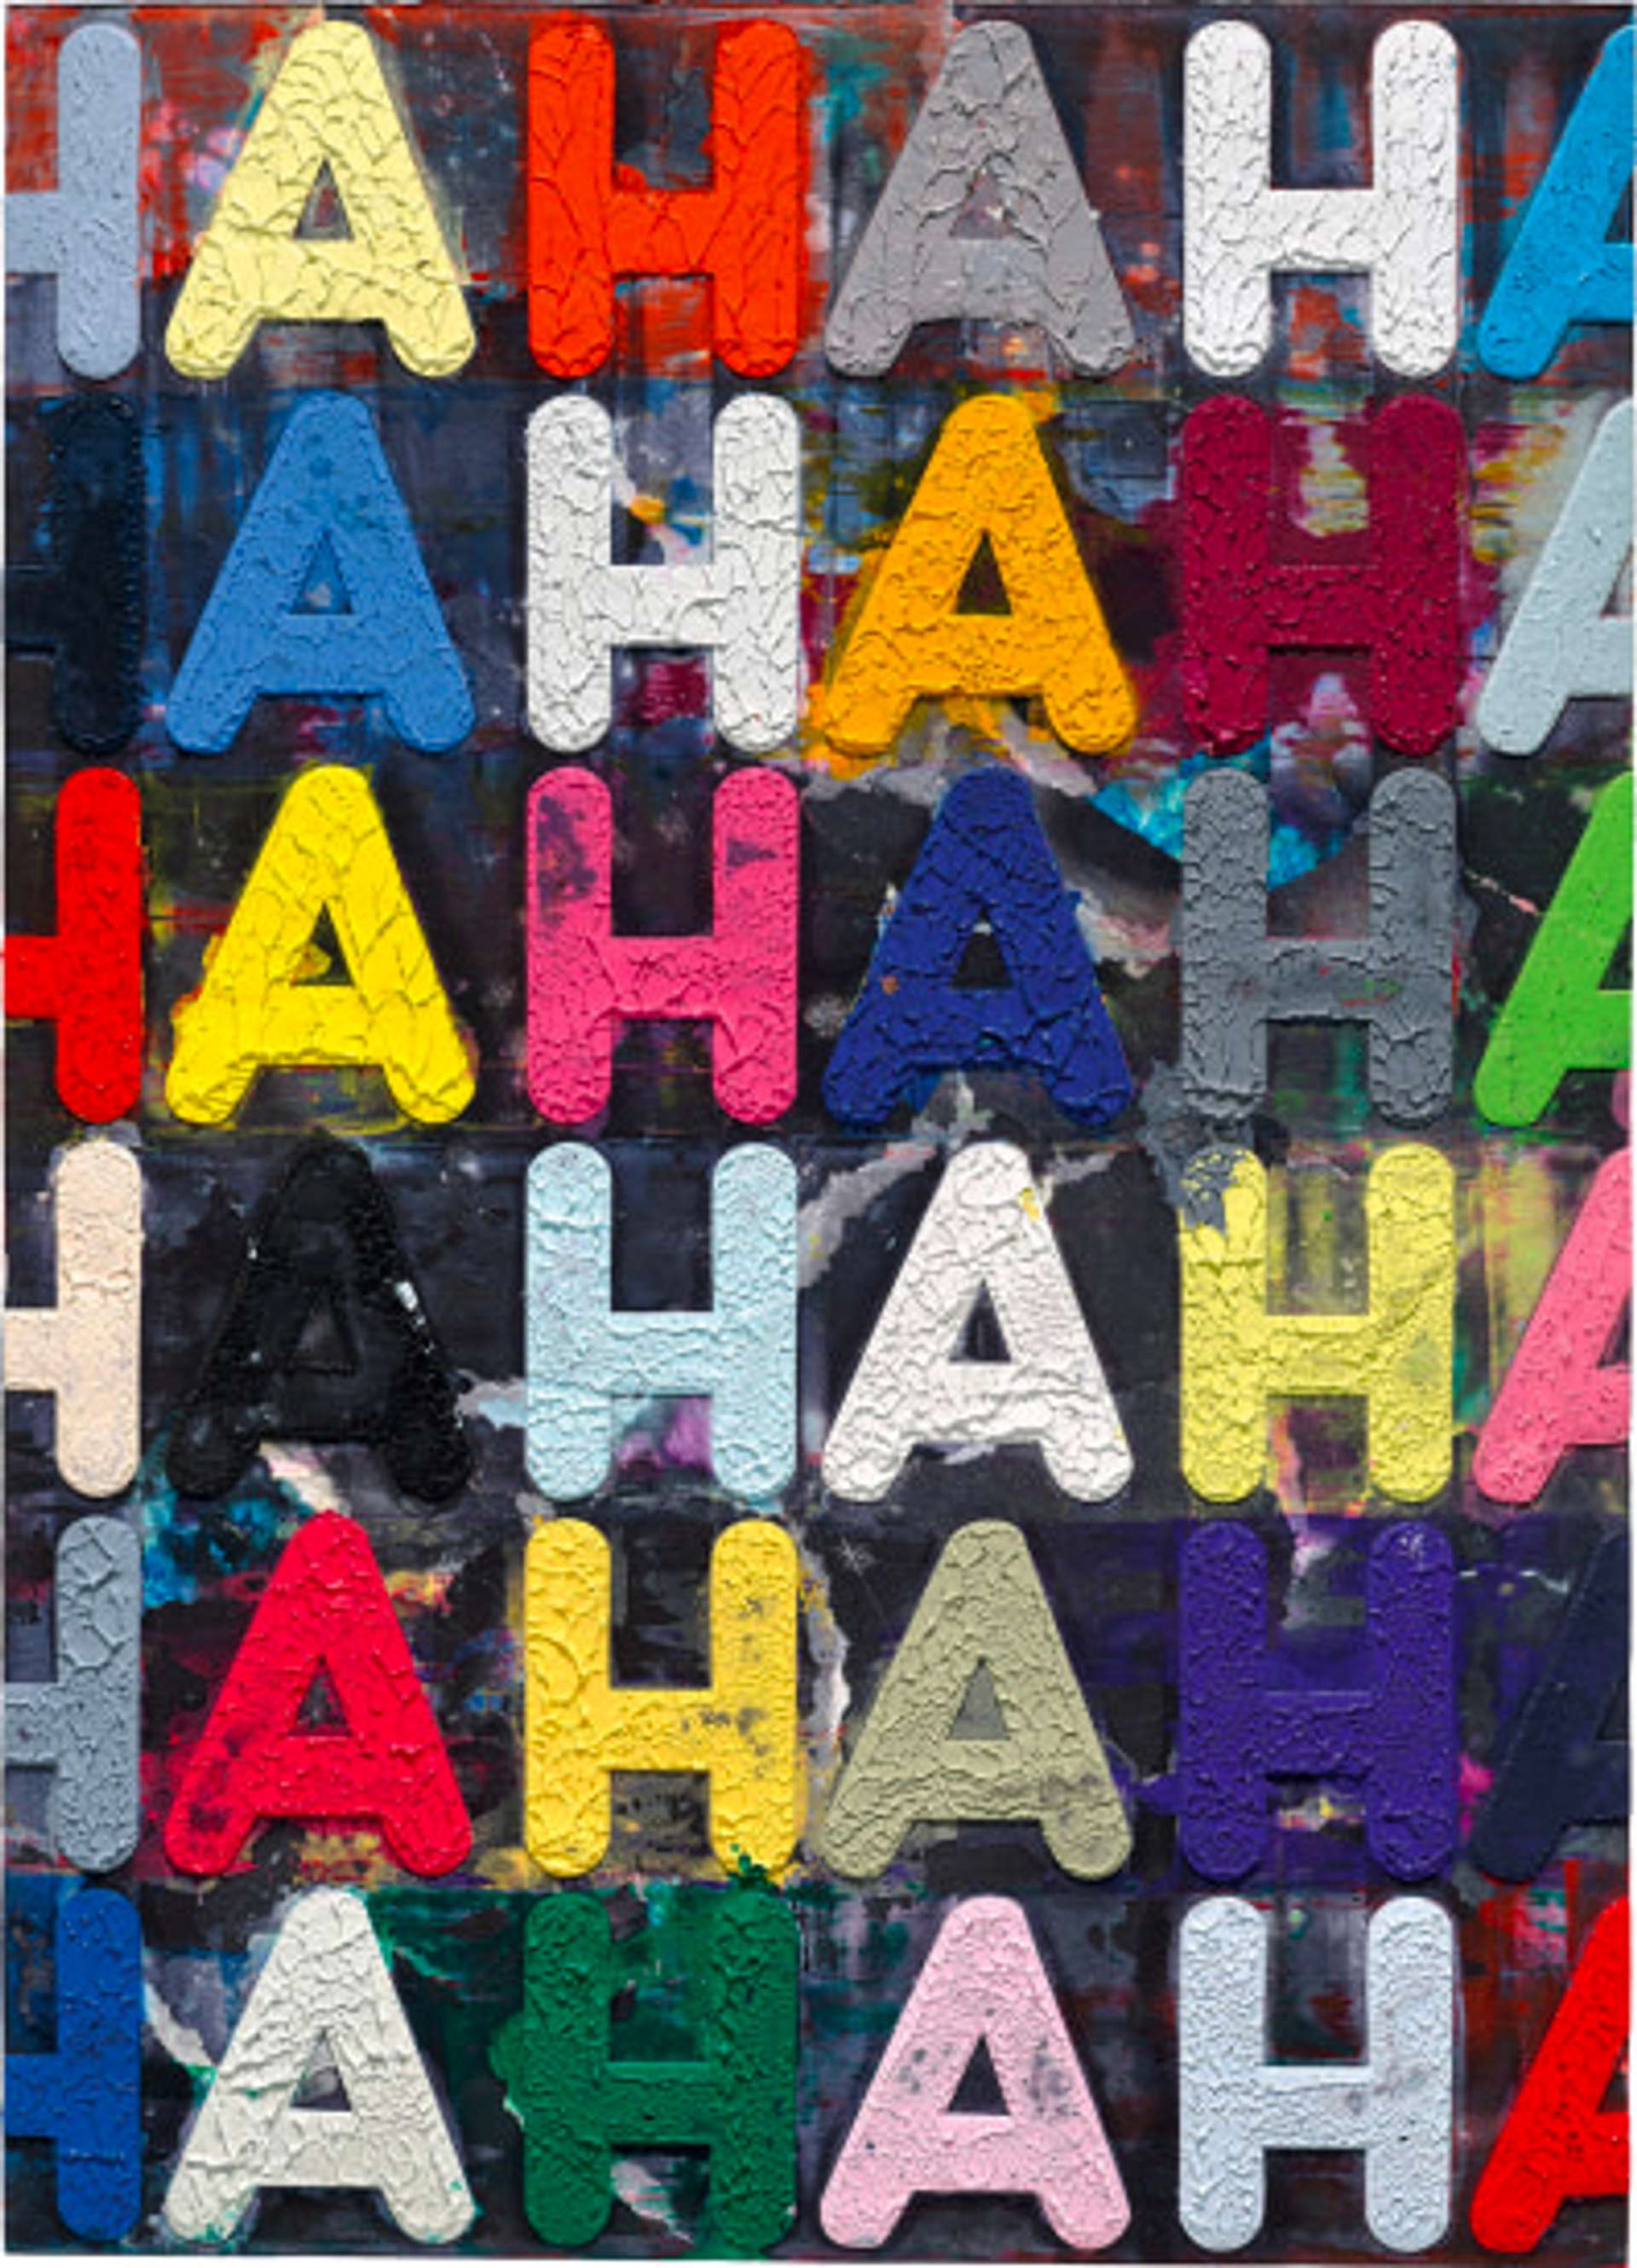 Vibrant and colourful capital letters, "ha ha ha," fill the canvas in rows that stretch from the top to the bottom, creating a scrolling marquee effect. The letters command attention with their boldness and playfulness, while the abstracted background adds depth and visual interest to the composition.